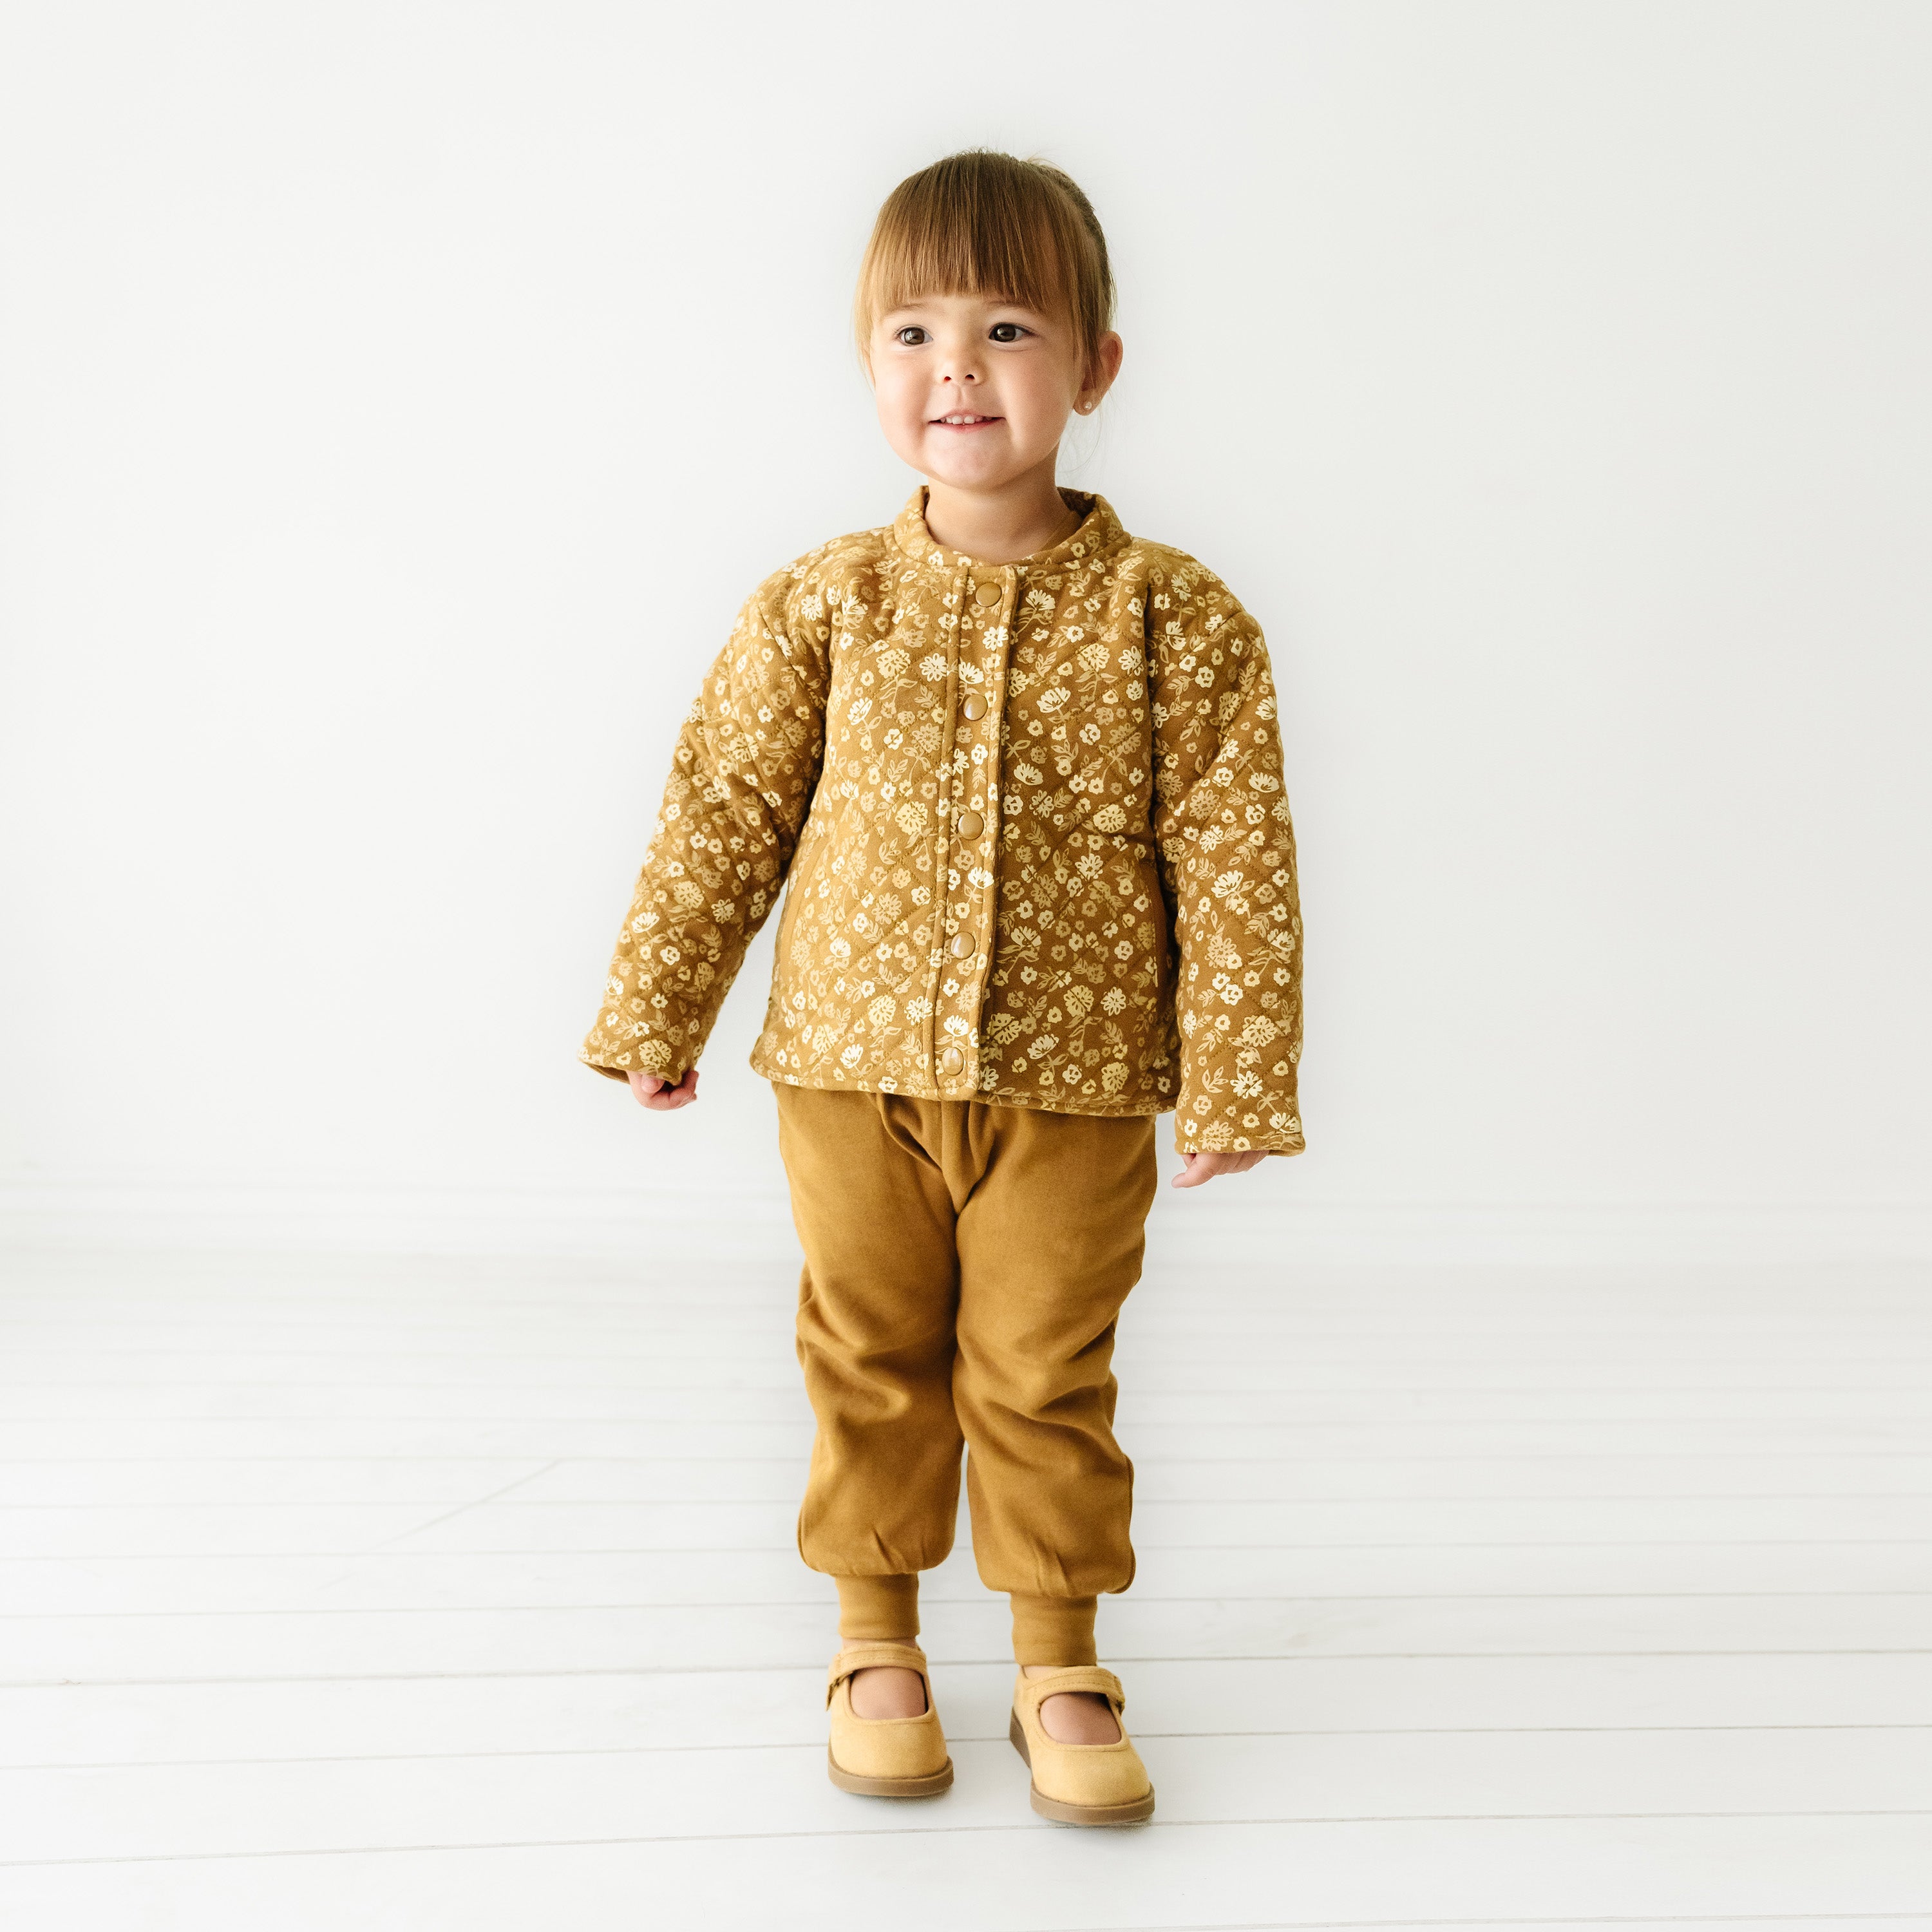 A toddler stands smiling in a studio, wearing an Organic Kids Wildflower organic merino wool buttoned jacket, taupe pants, and matching shoes against a plain white background.